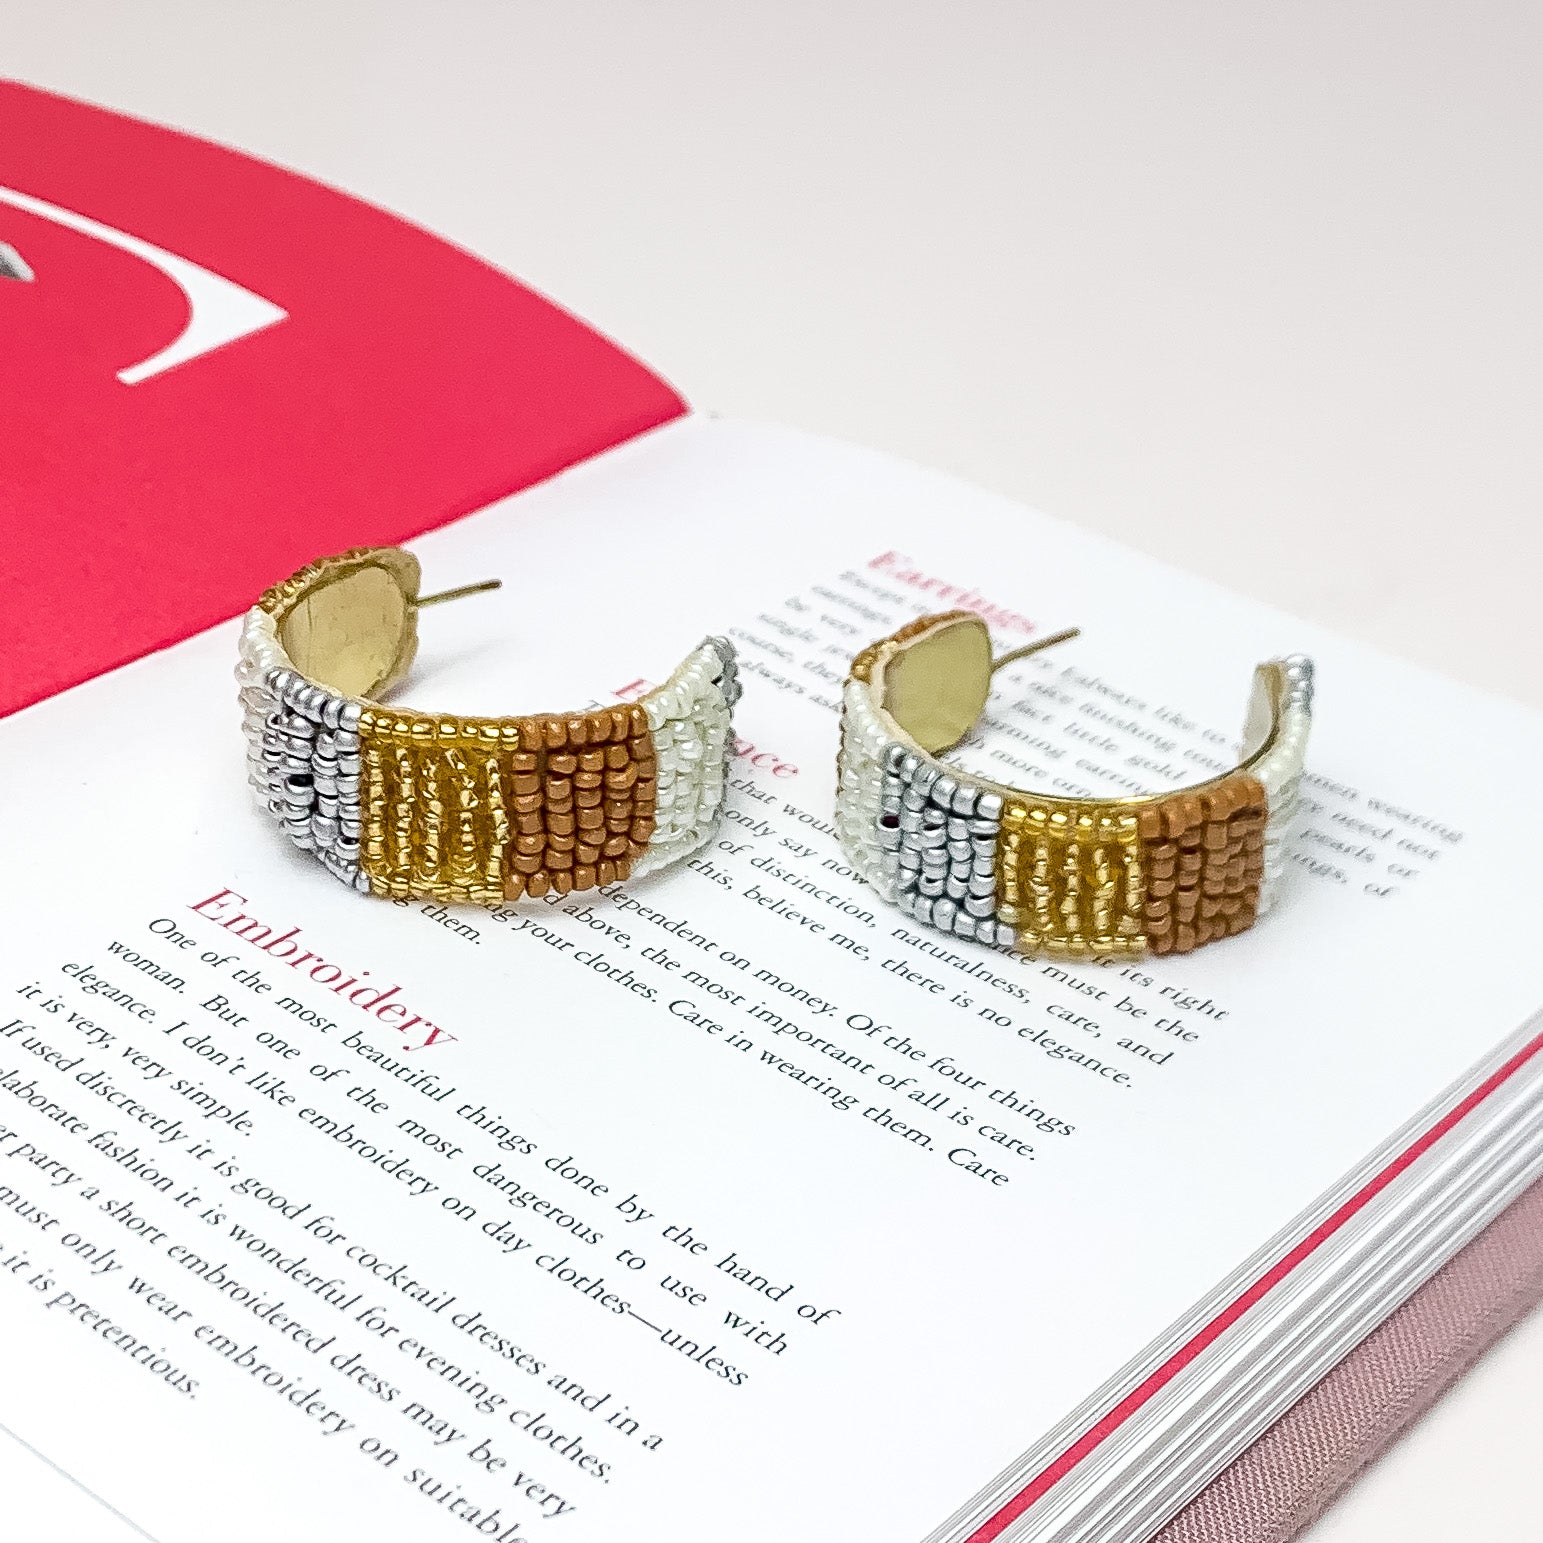 Vacay Era Gold Tone Beaded Hoop Earrings in Neutral Tones. Pictured on a white background with the earrings laying on an open page of a book.